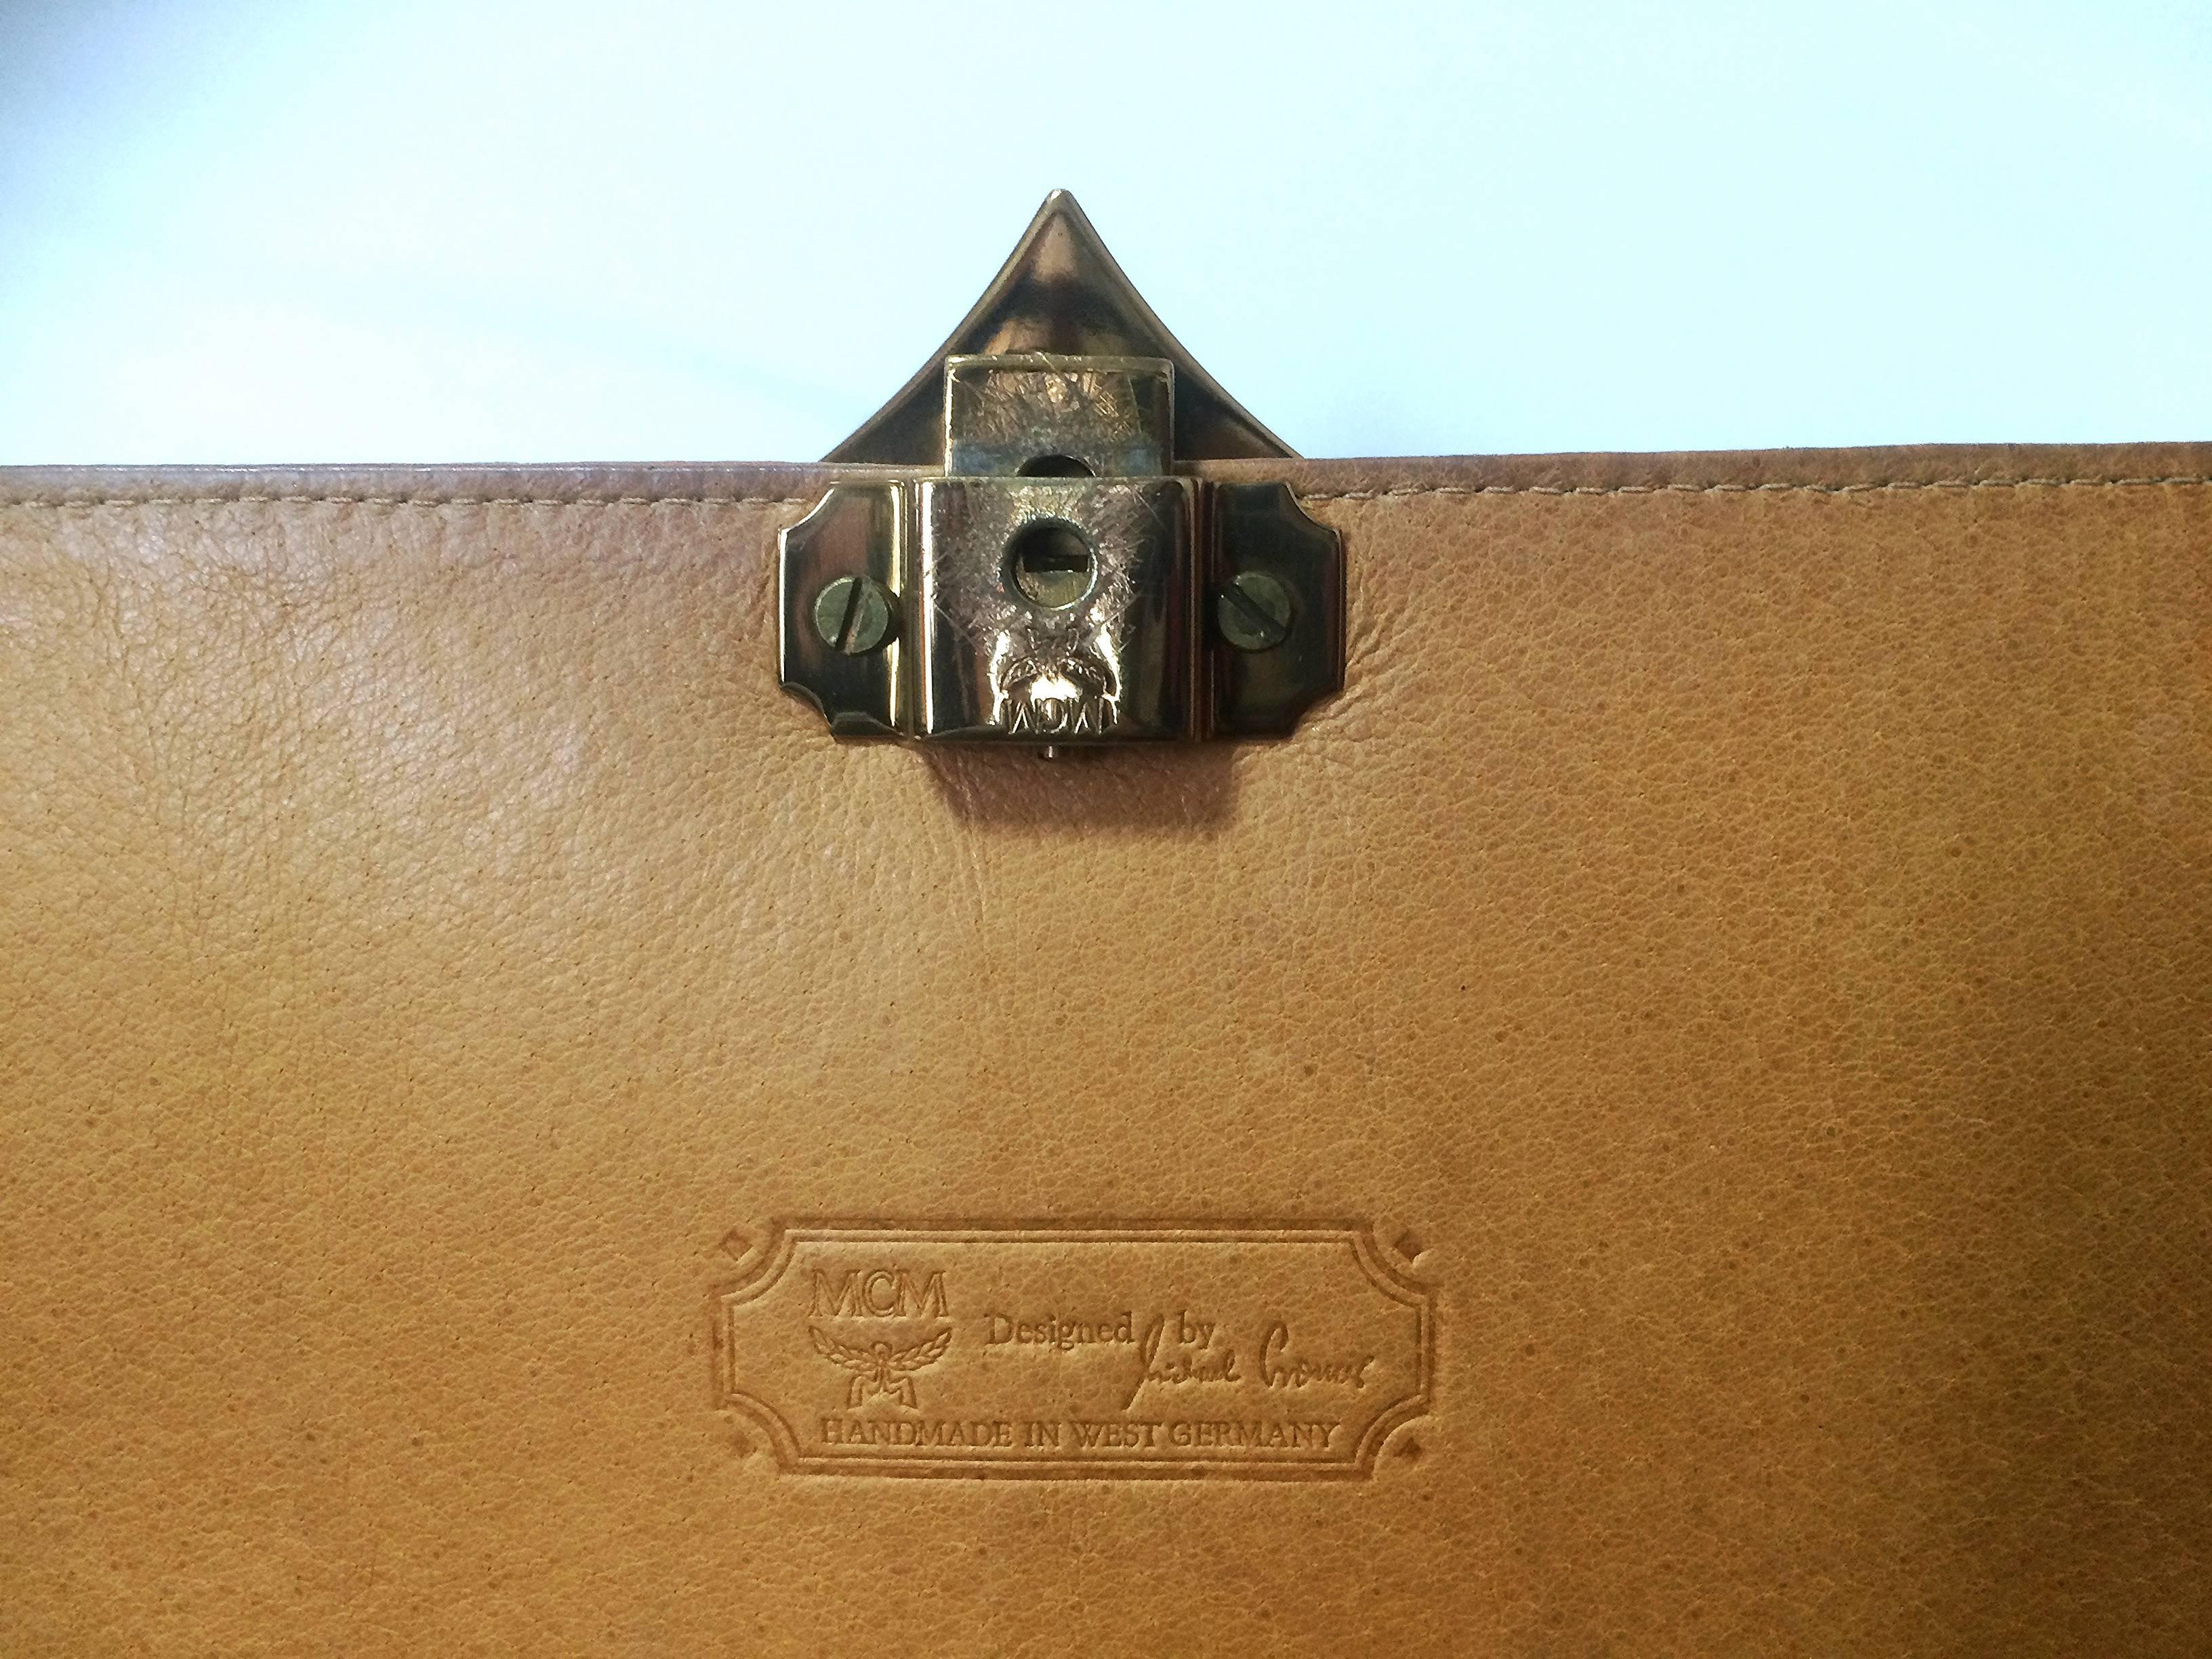 Vintage MCM brown shoulder bag with leather strap, designed by Michael Cromer In Good Condition For Sale In Kashiwa, Chiba